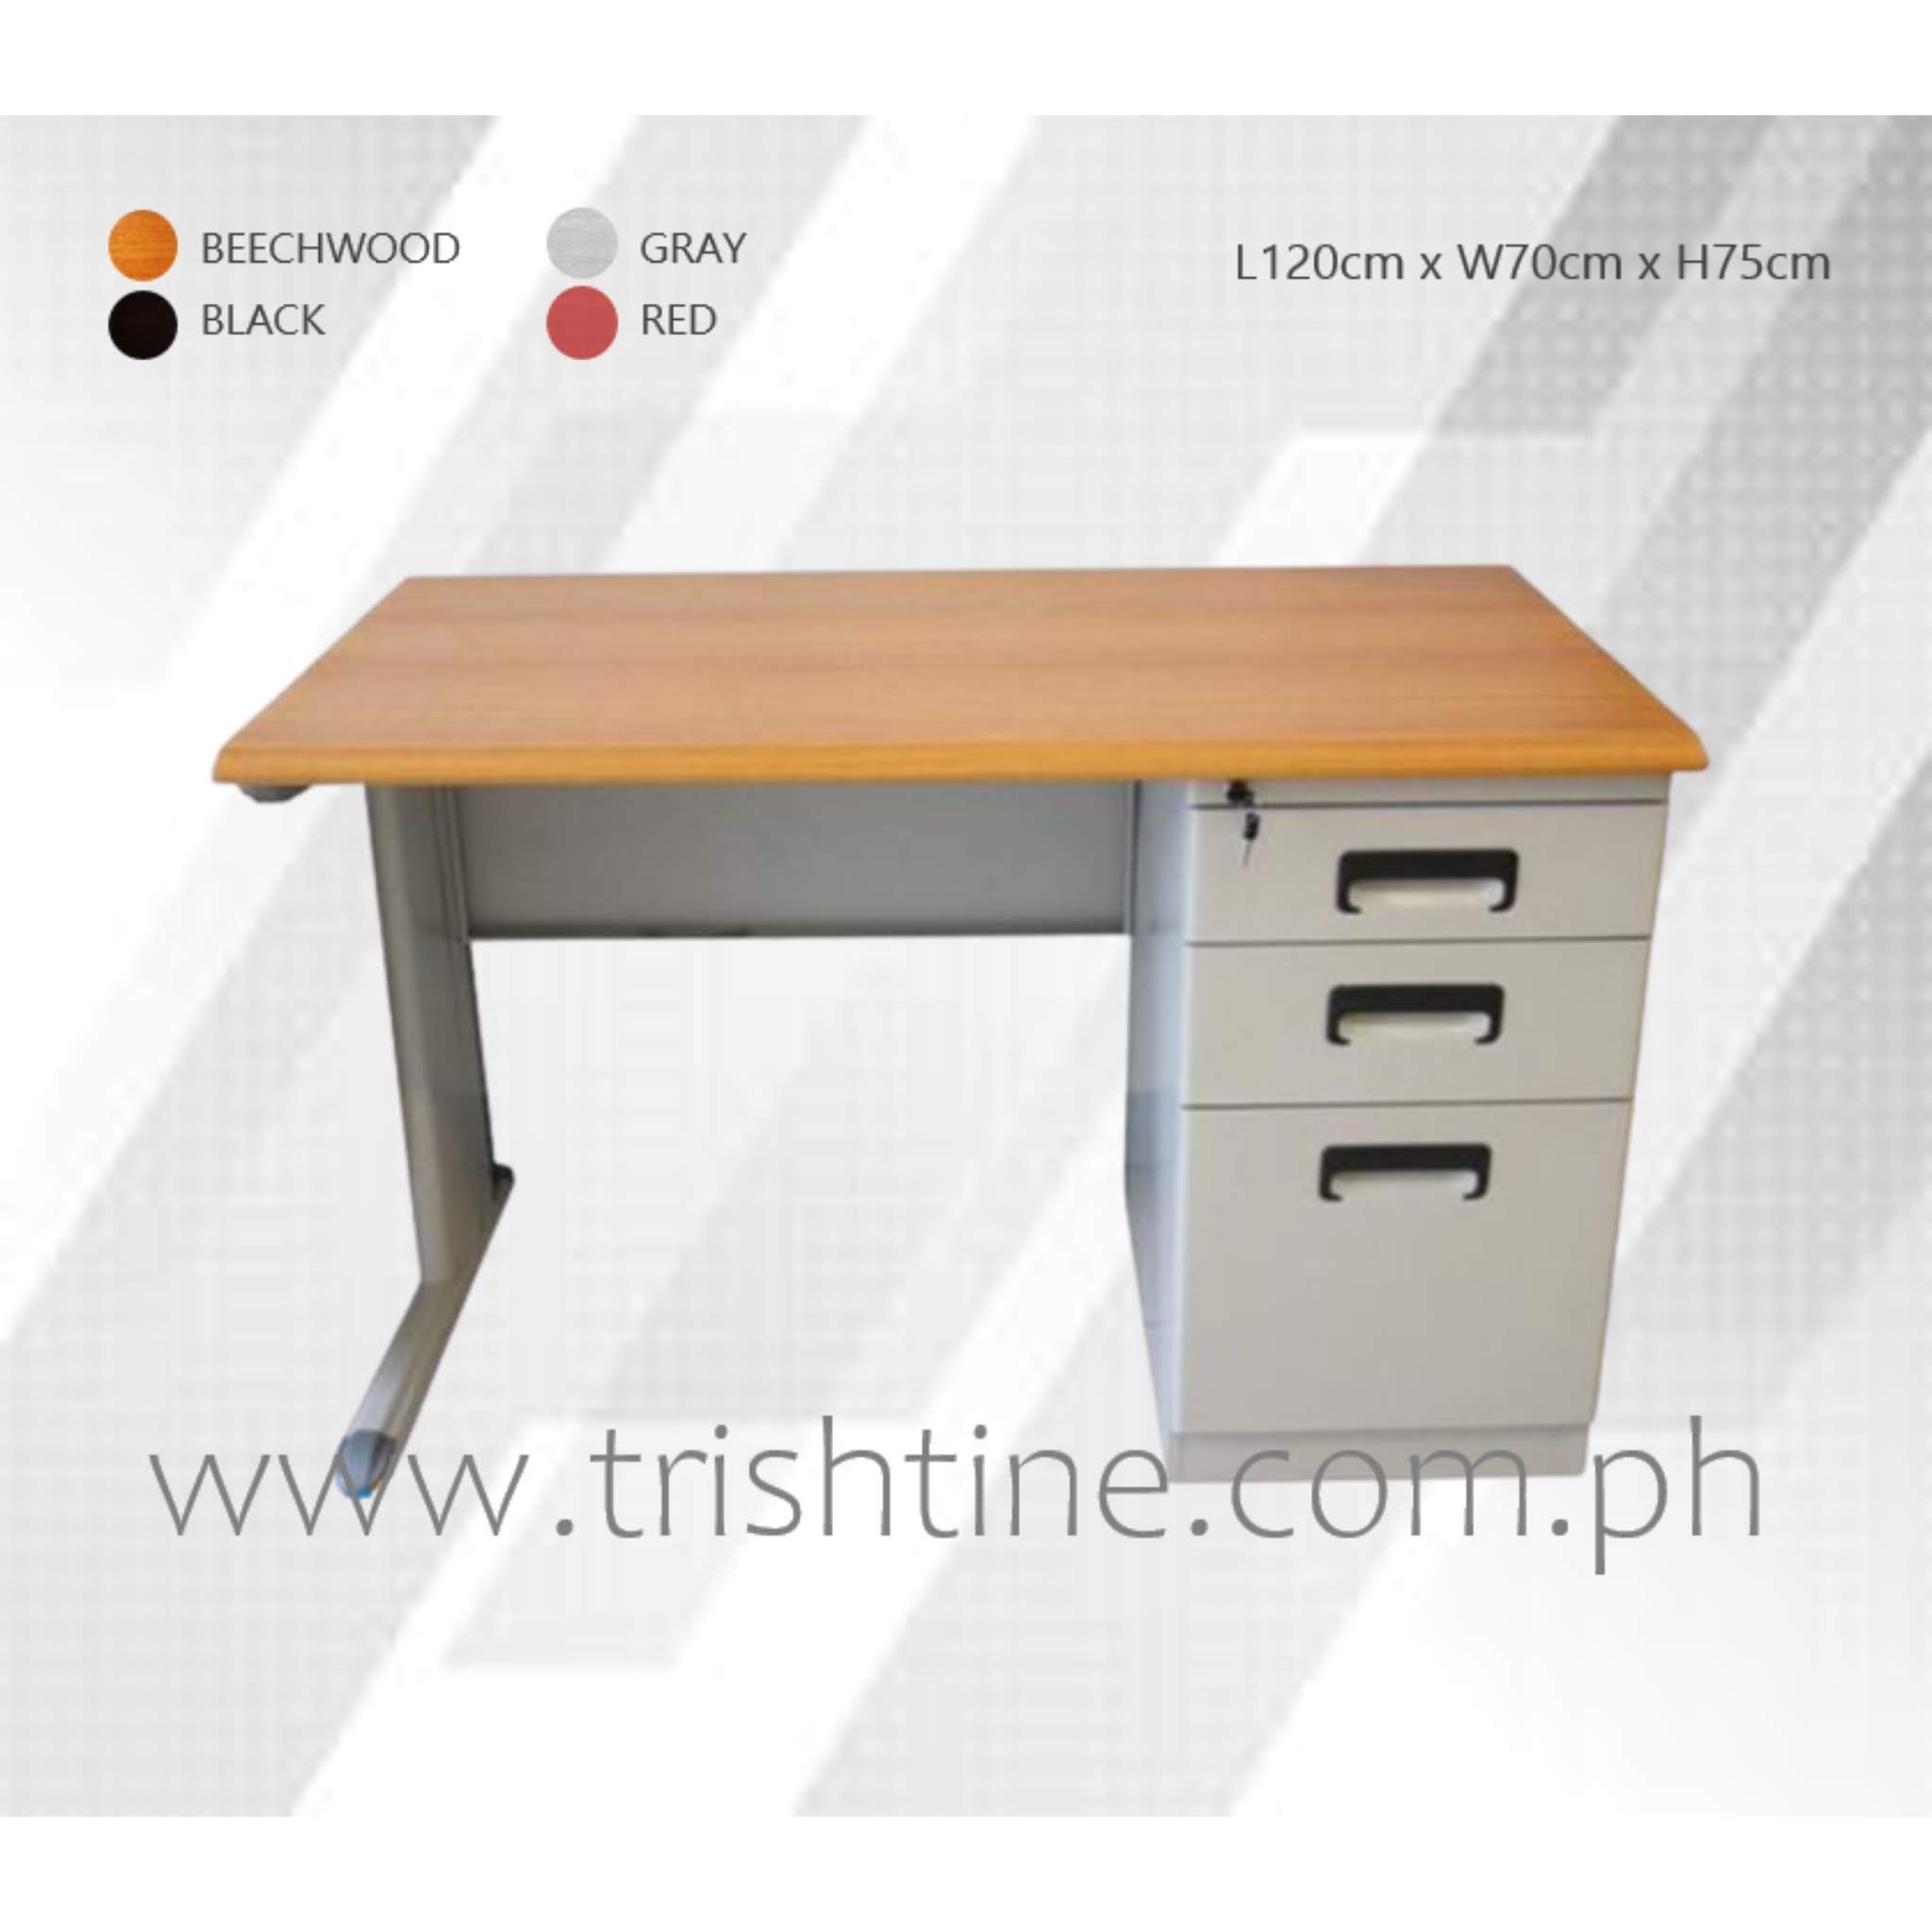 Toff 015 Freestanding Table With Drawers | Trishtine Intended For Freestanding Tables With Drawers (View 2 of 20)